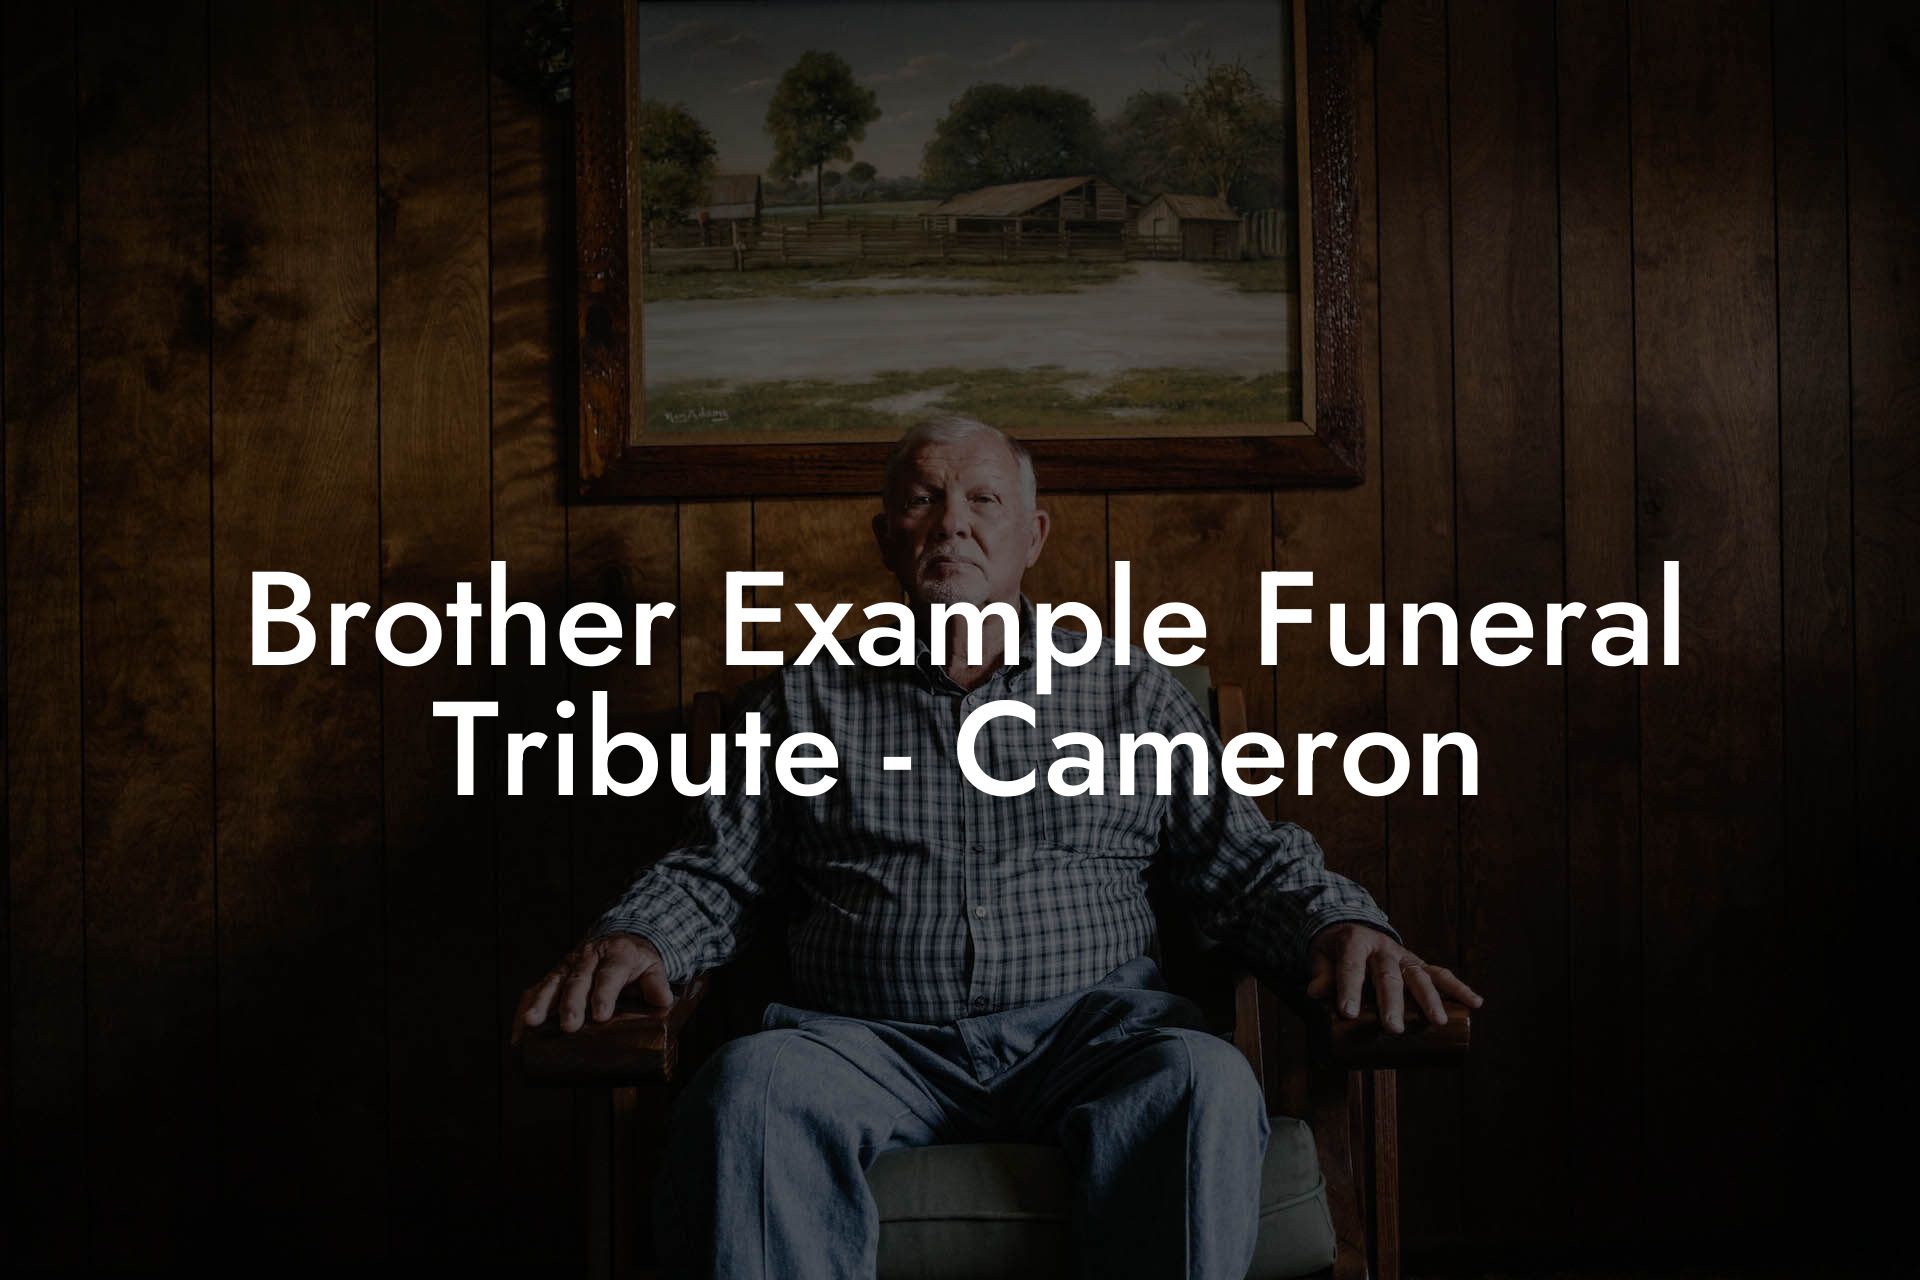 Brother Example Funeral Tribute - Cameron